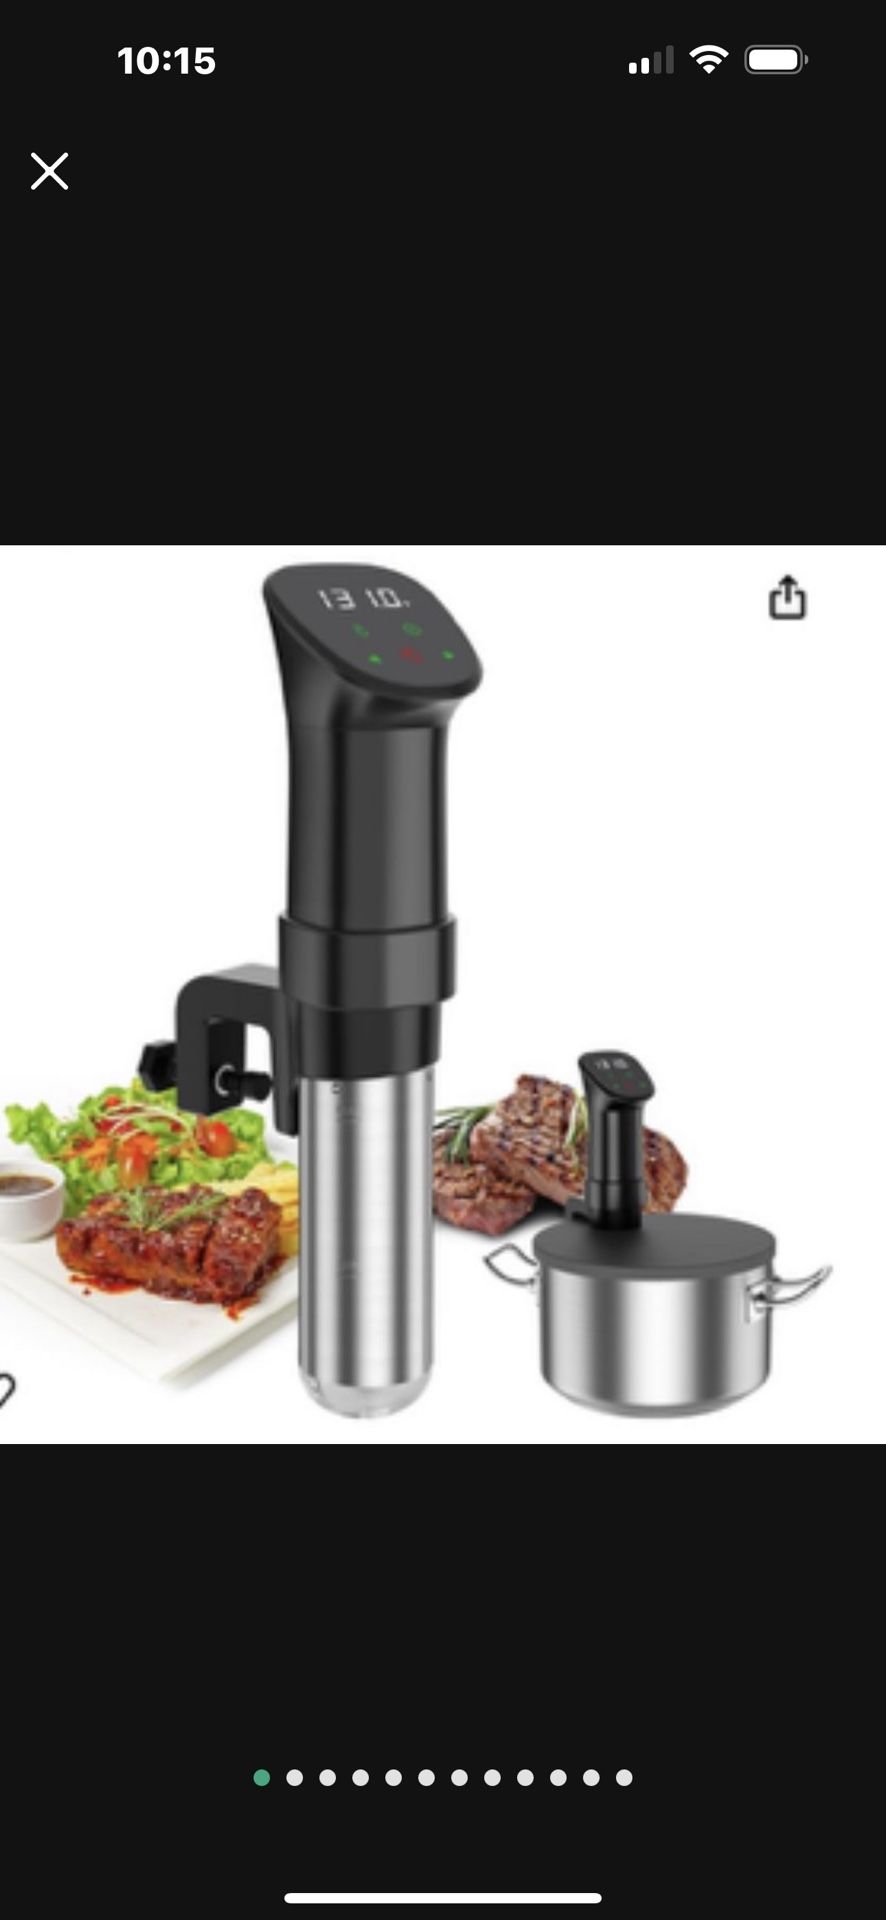 Sous Vide Machine-Suvee Cooker-Rocyis Sous Vide Kit with Lid, $50 Posted in Upland, CA